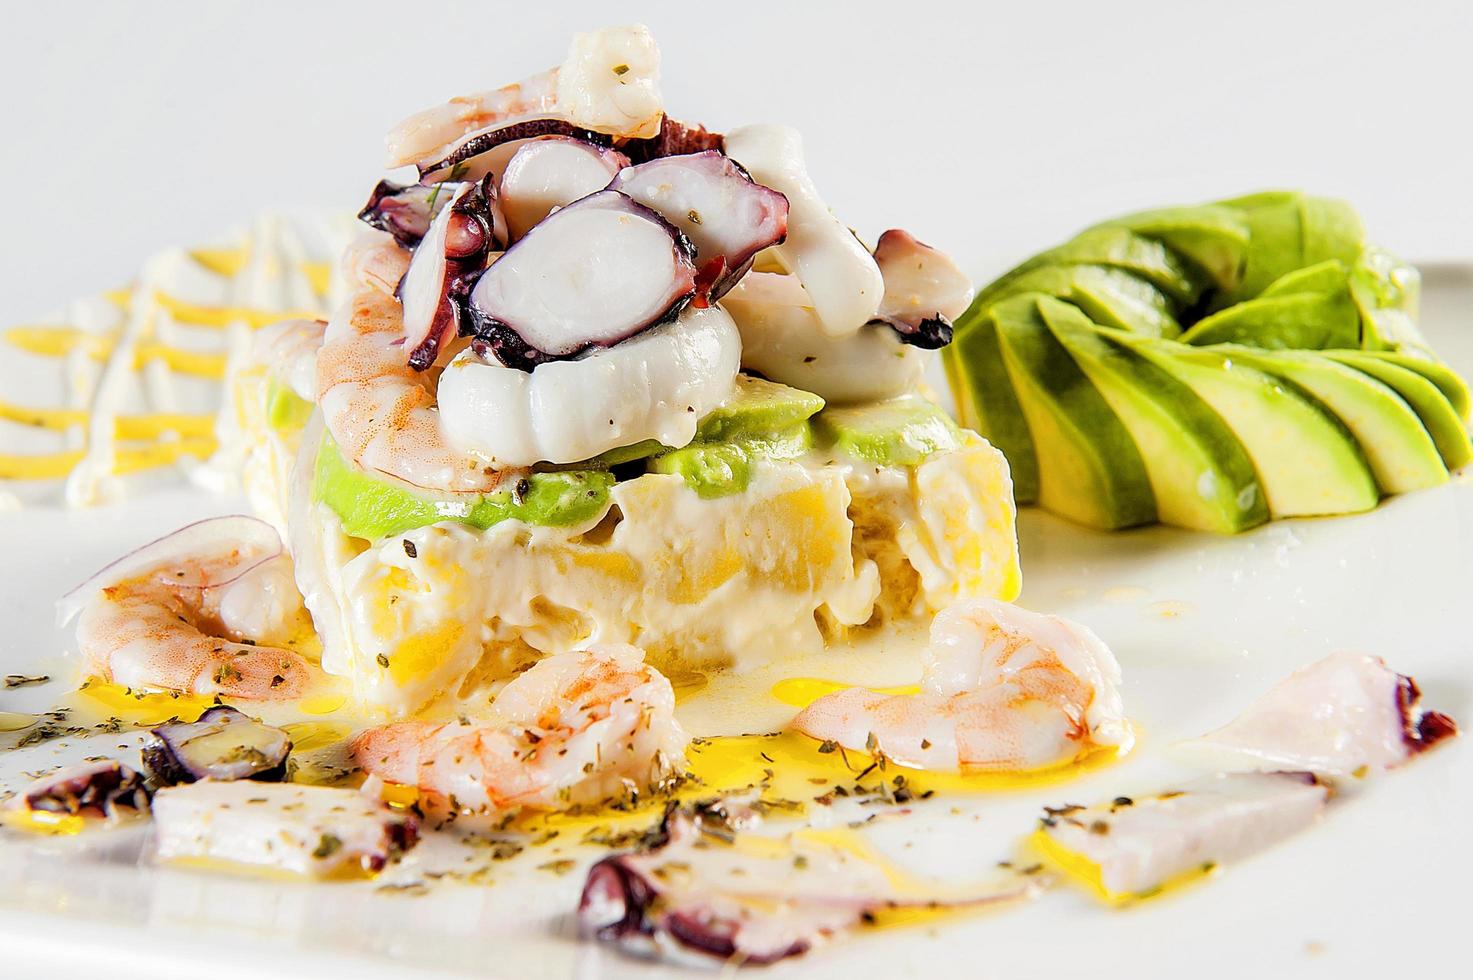 Causa stuffed with seafood traditional dish of Peruvian cuisine photo